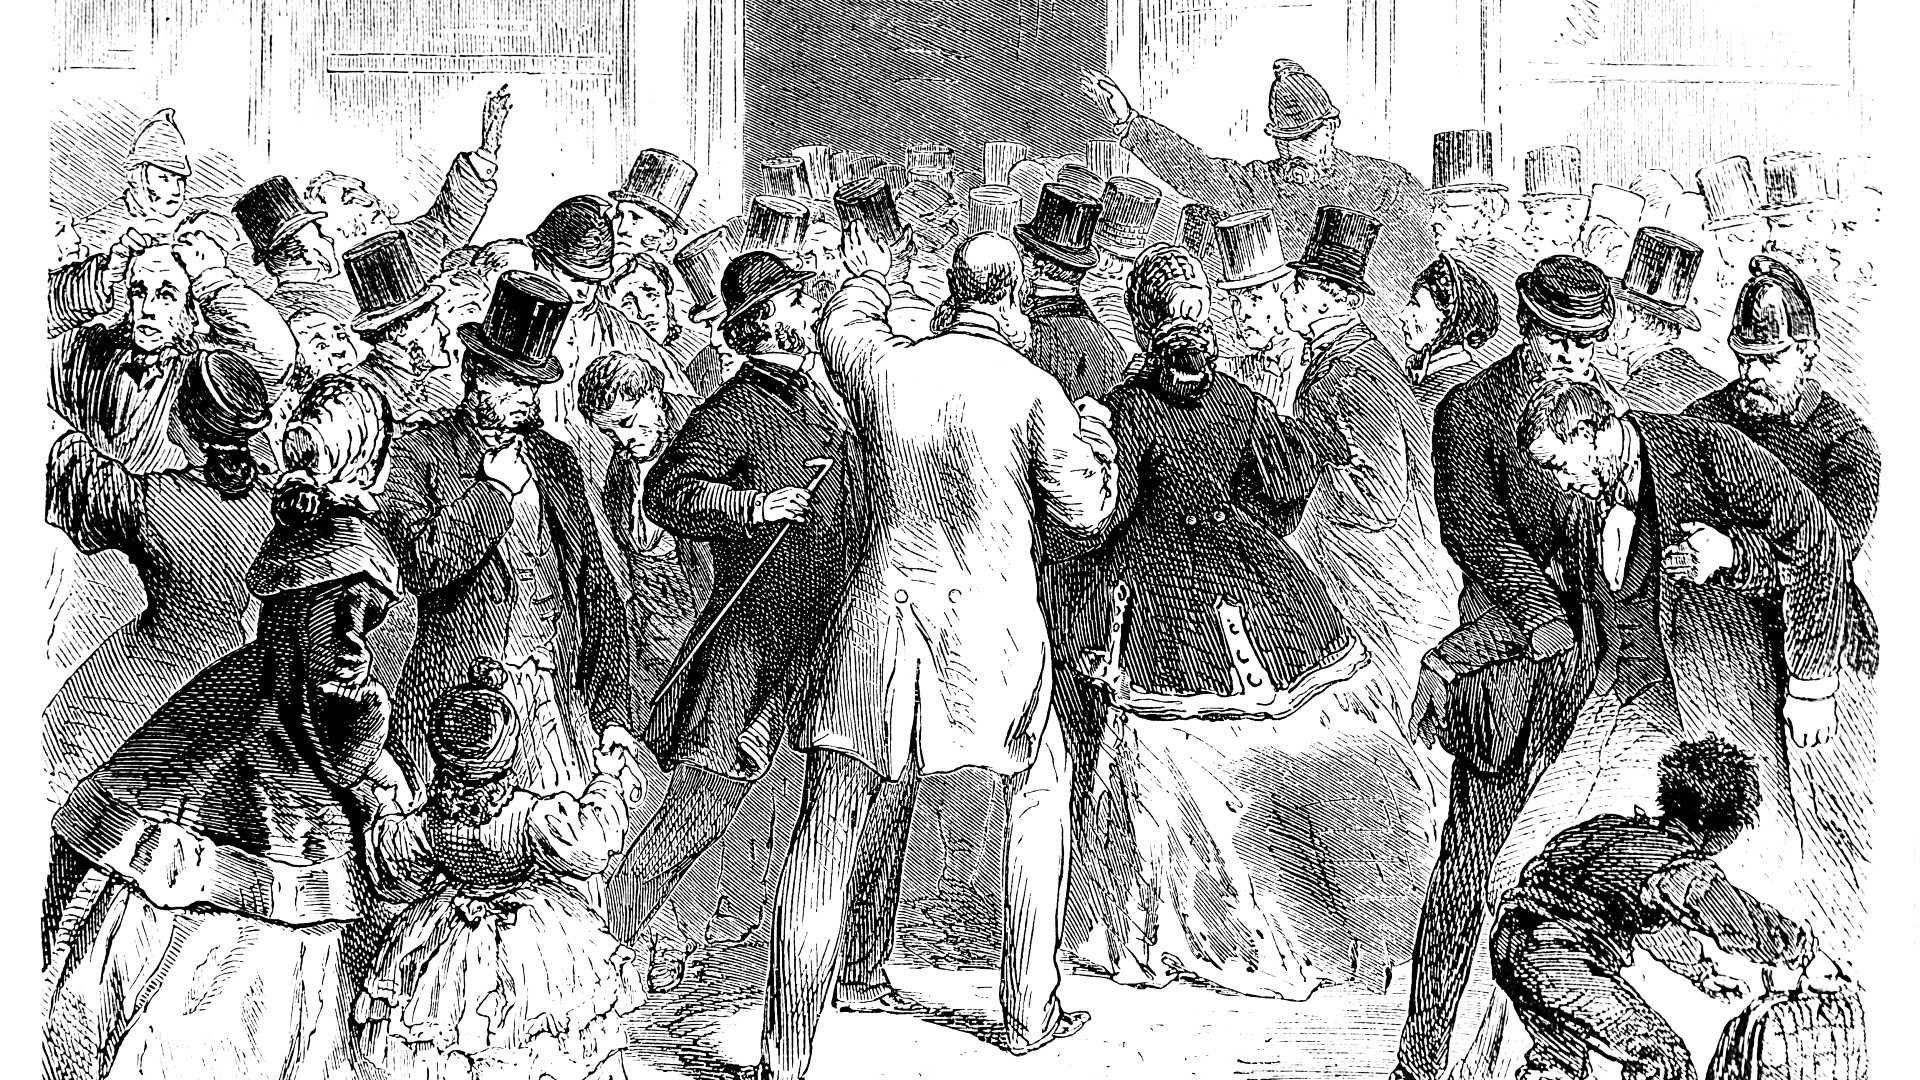 Illustration showing the chaos outside the London bank Overend, Gurney and Company